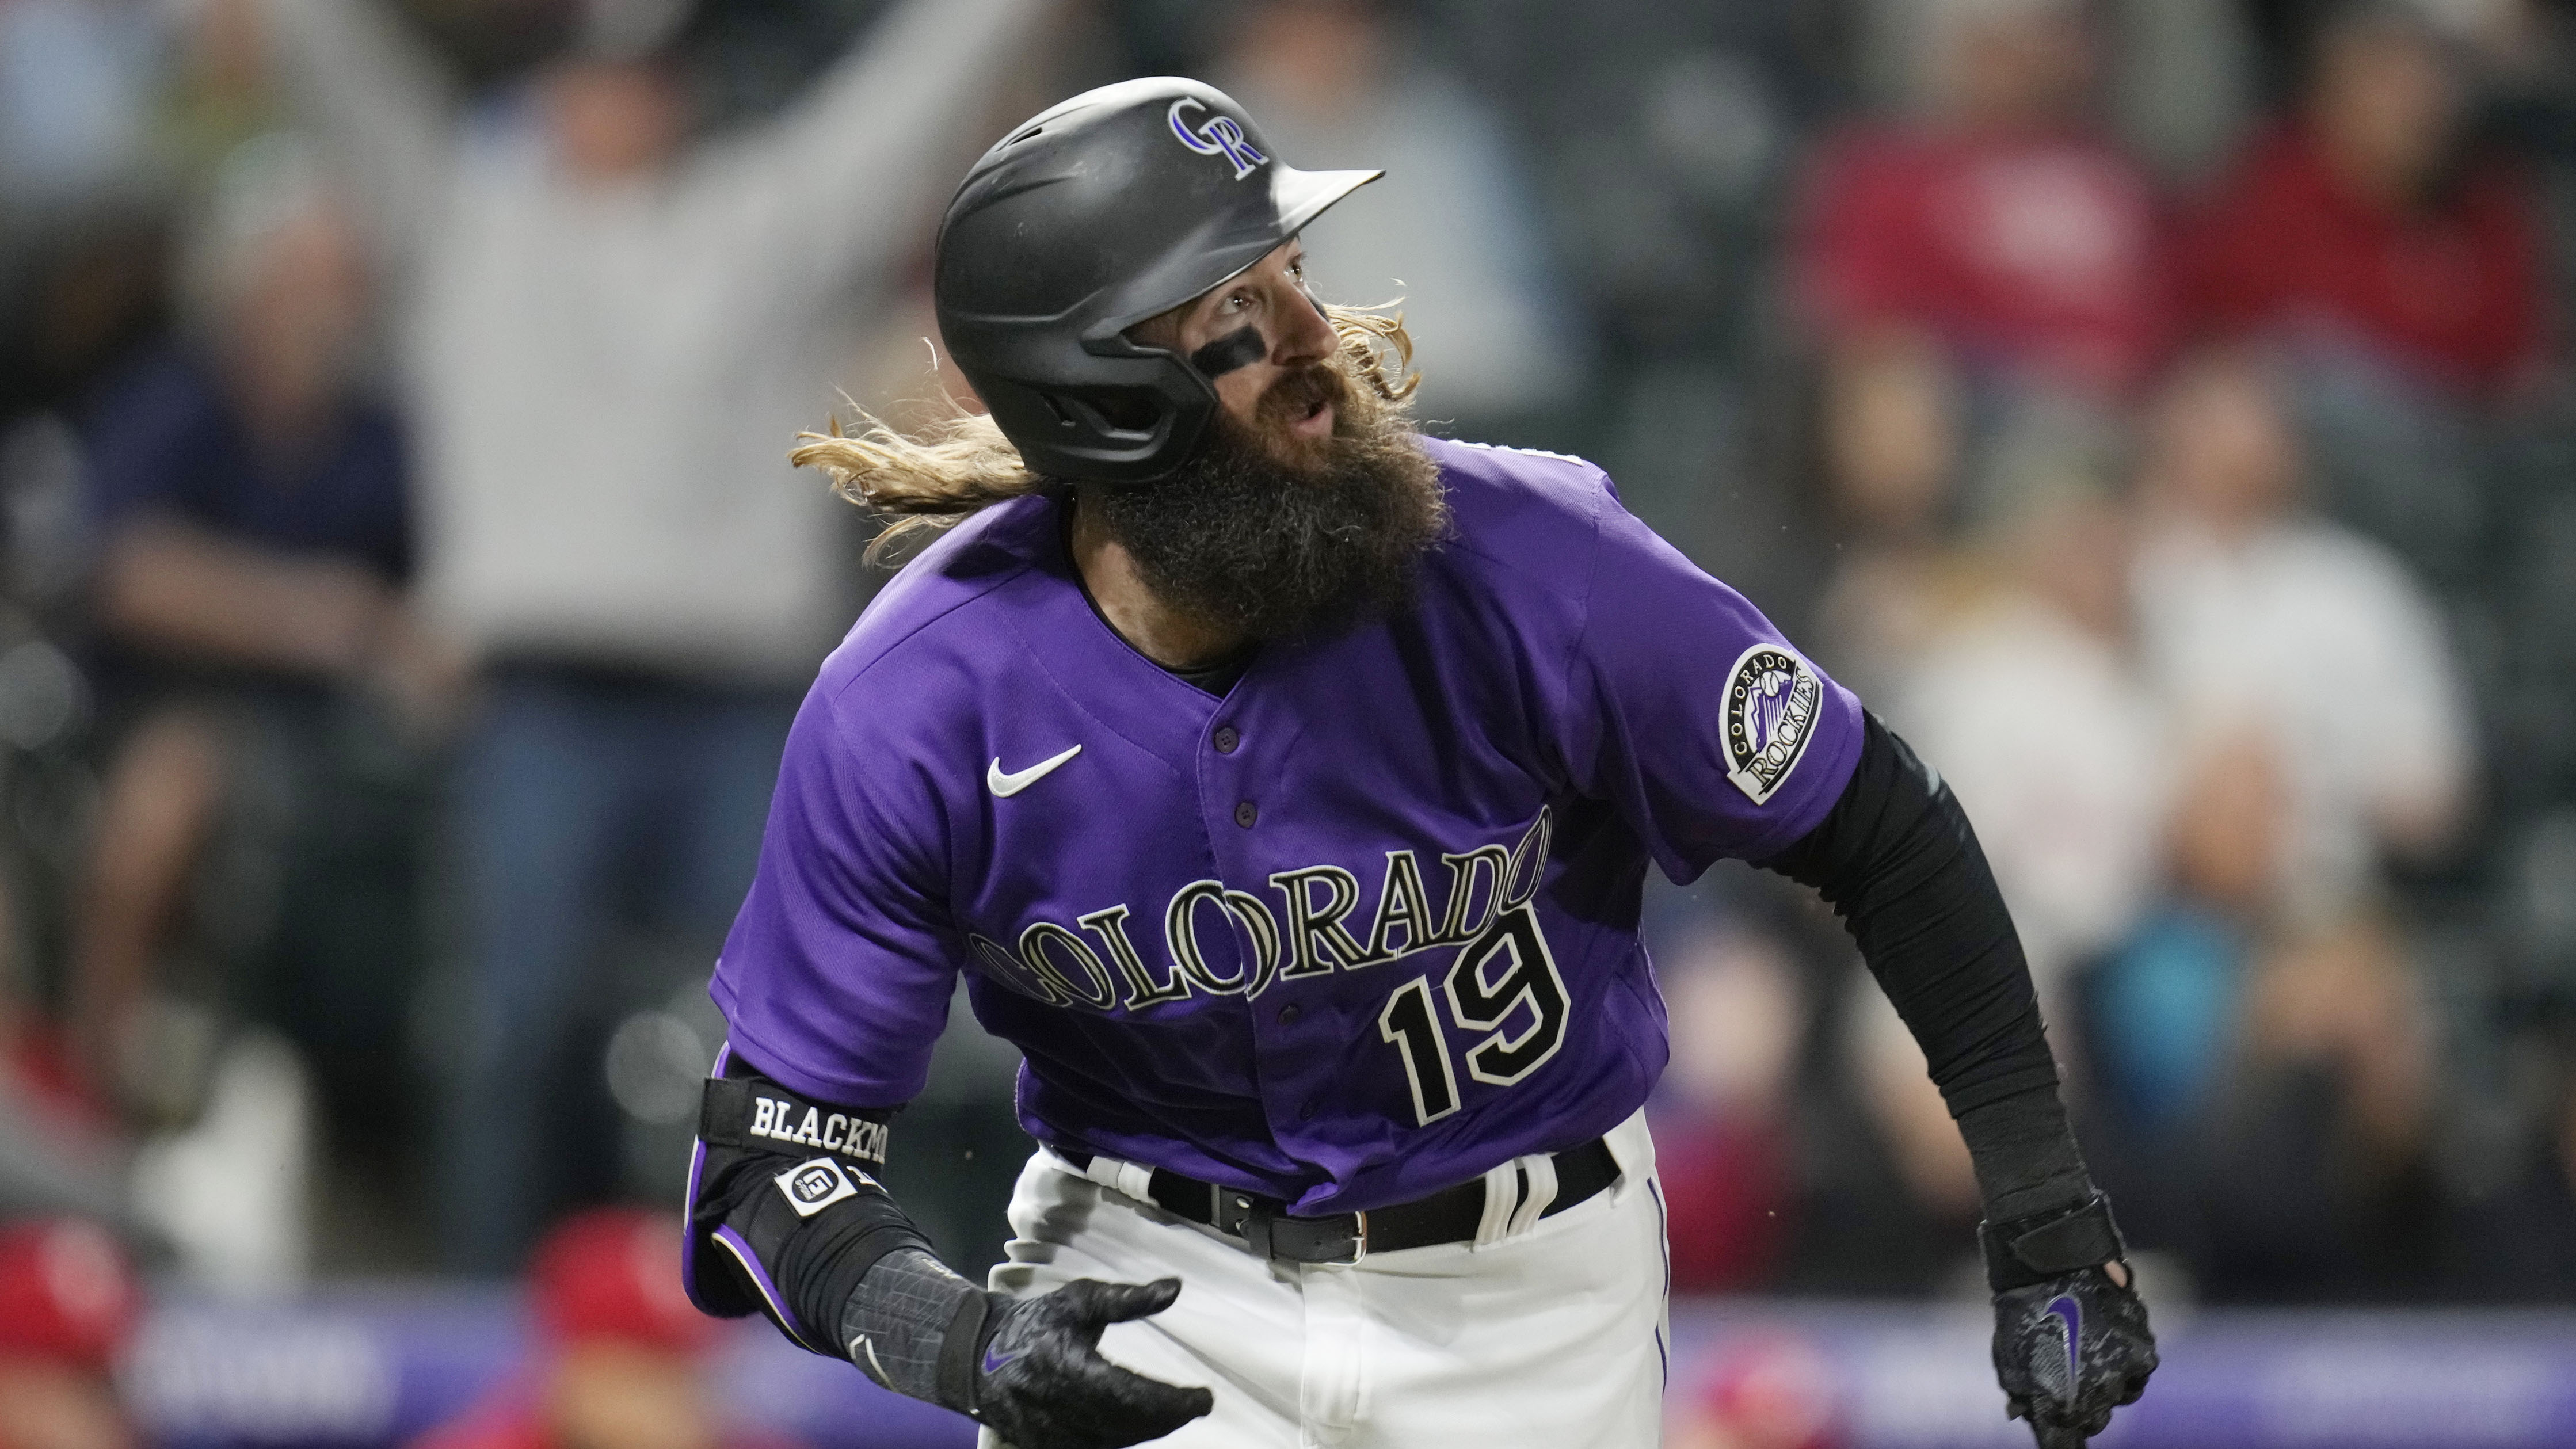 Charlie Blackmon, City Connect and Rockies' rookies highlight best moments  of 2022